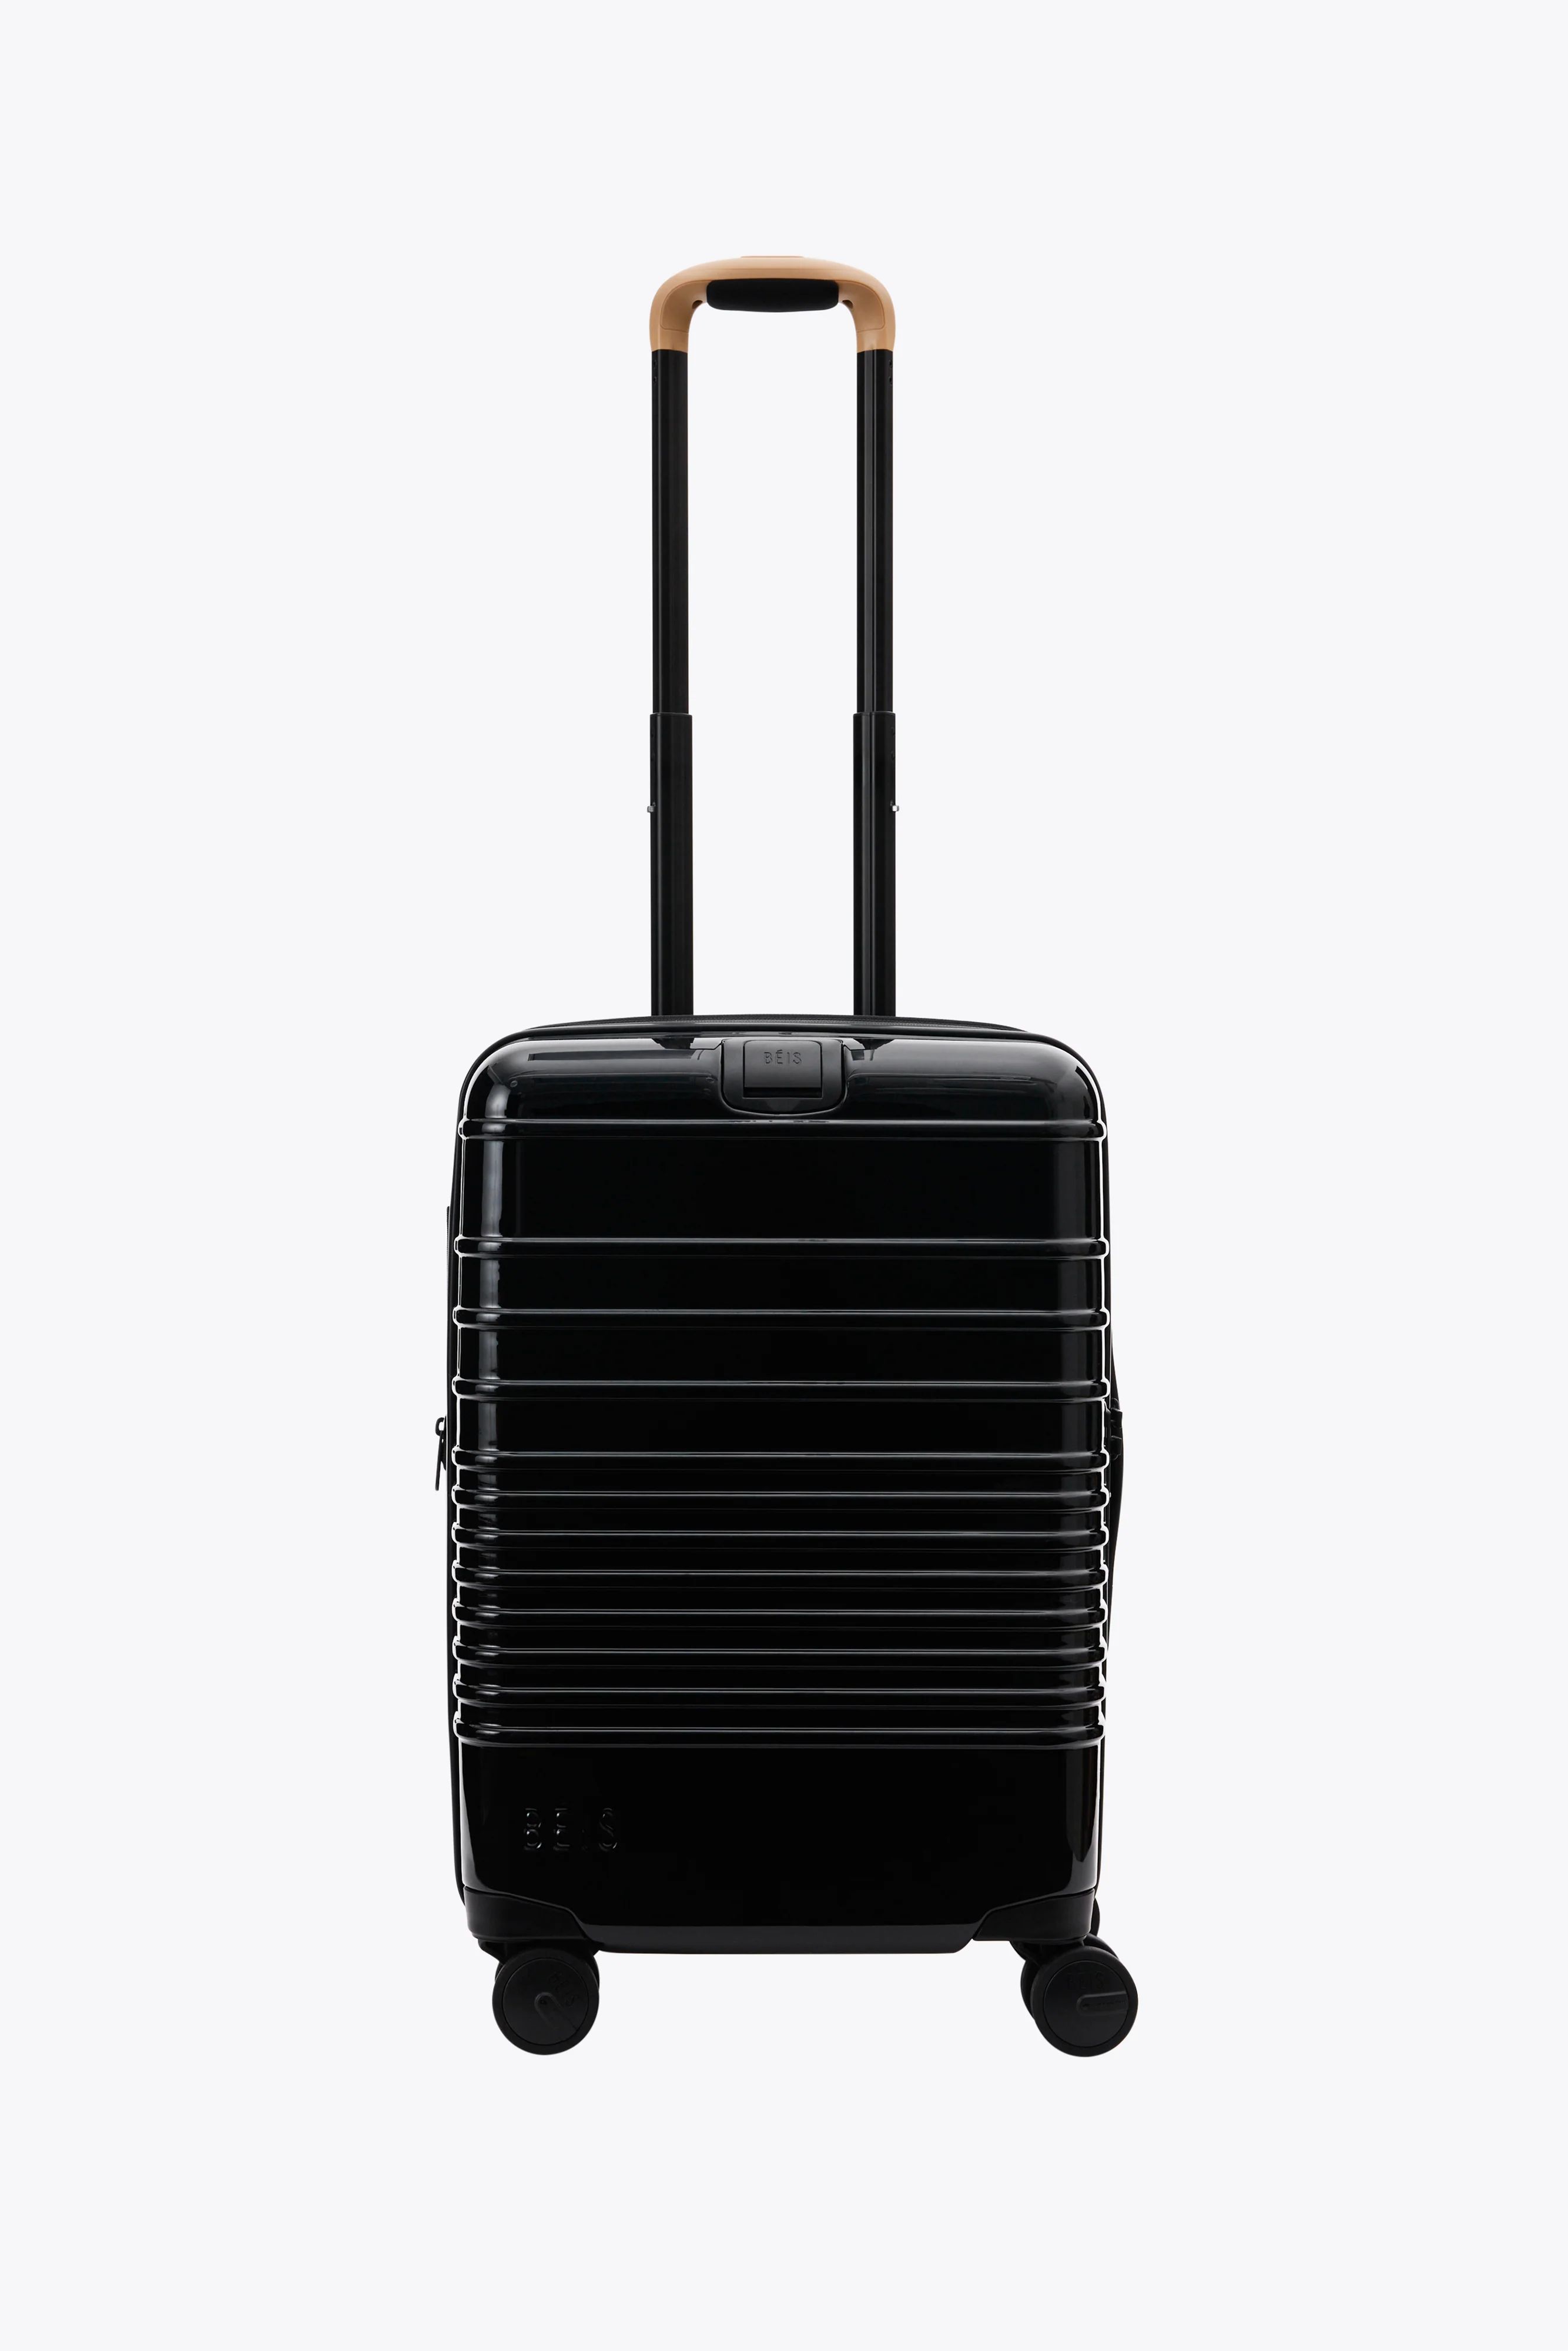 THE CARRY-ON ROLLER IN GLOSSY BLACK | BÉIS Travel